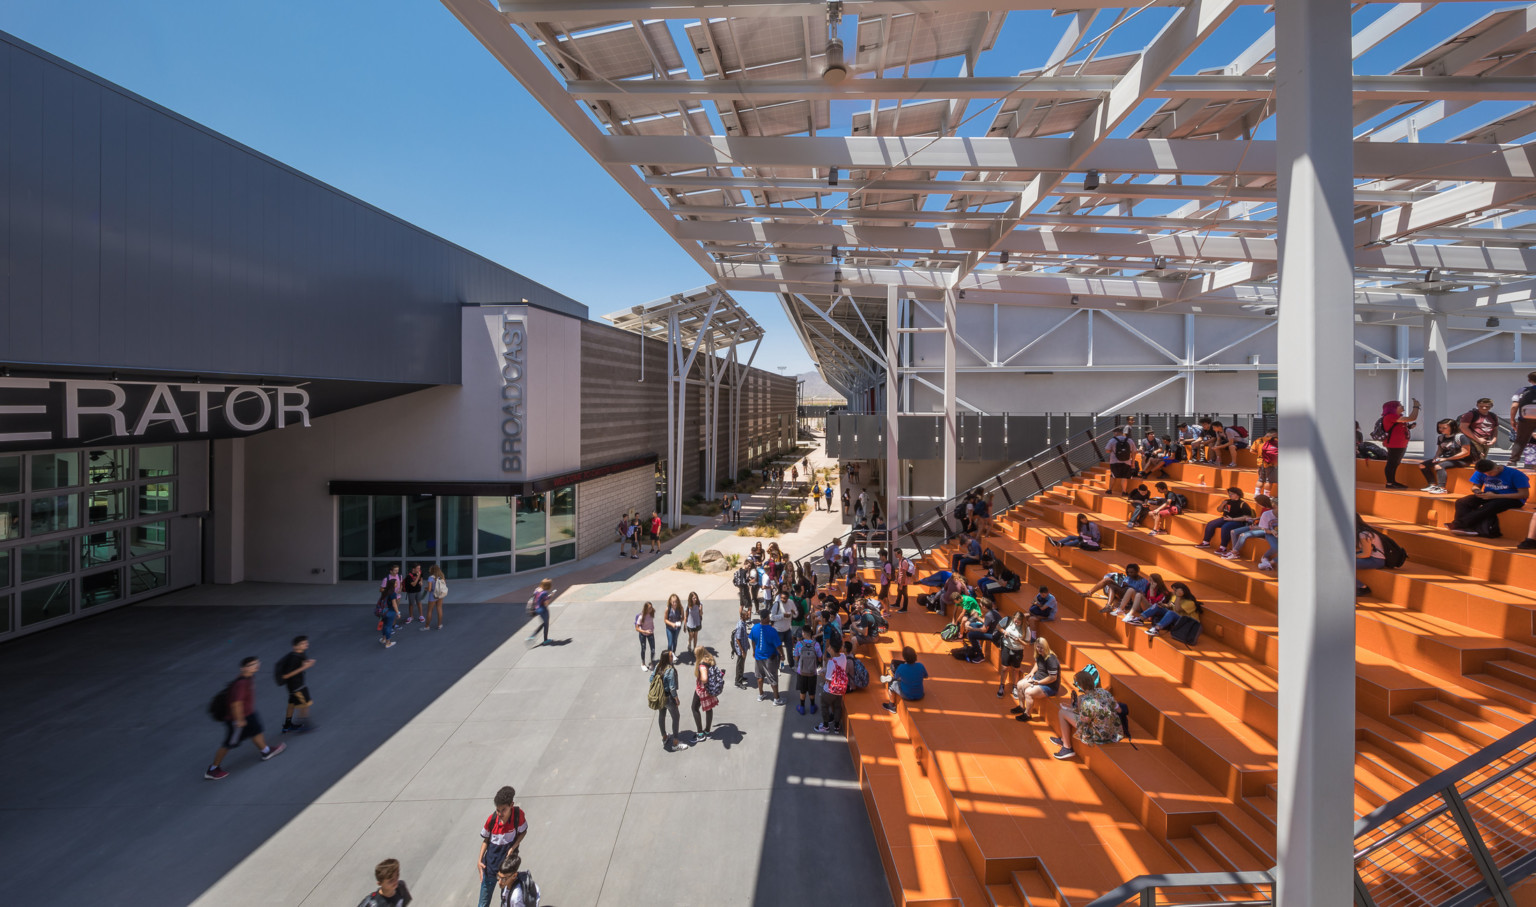 orange bleacher seating shaded by a solar panel canopy